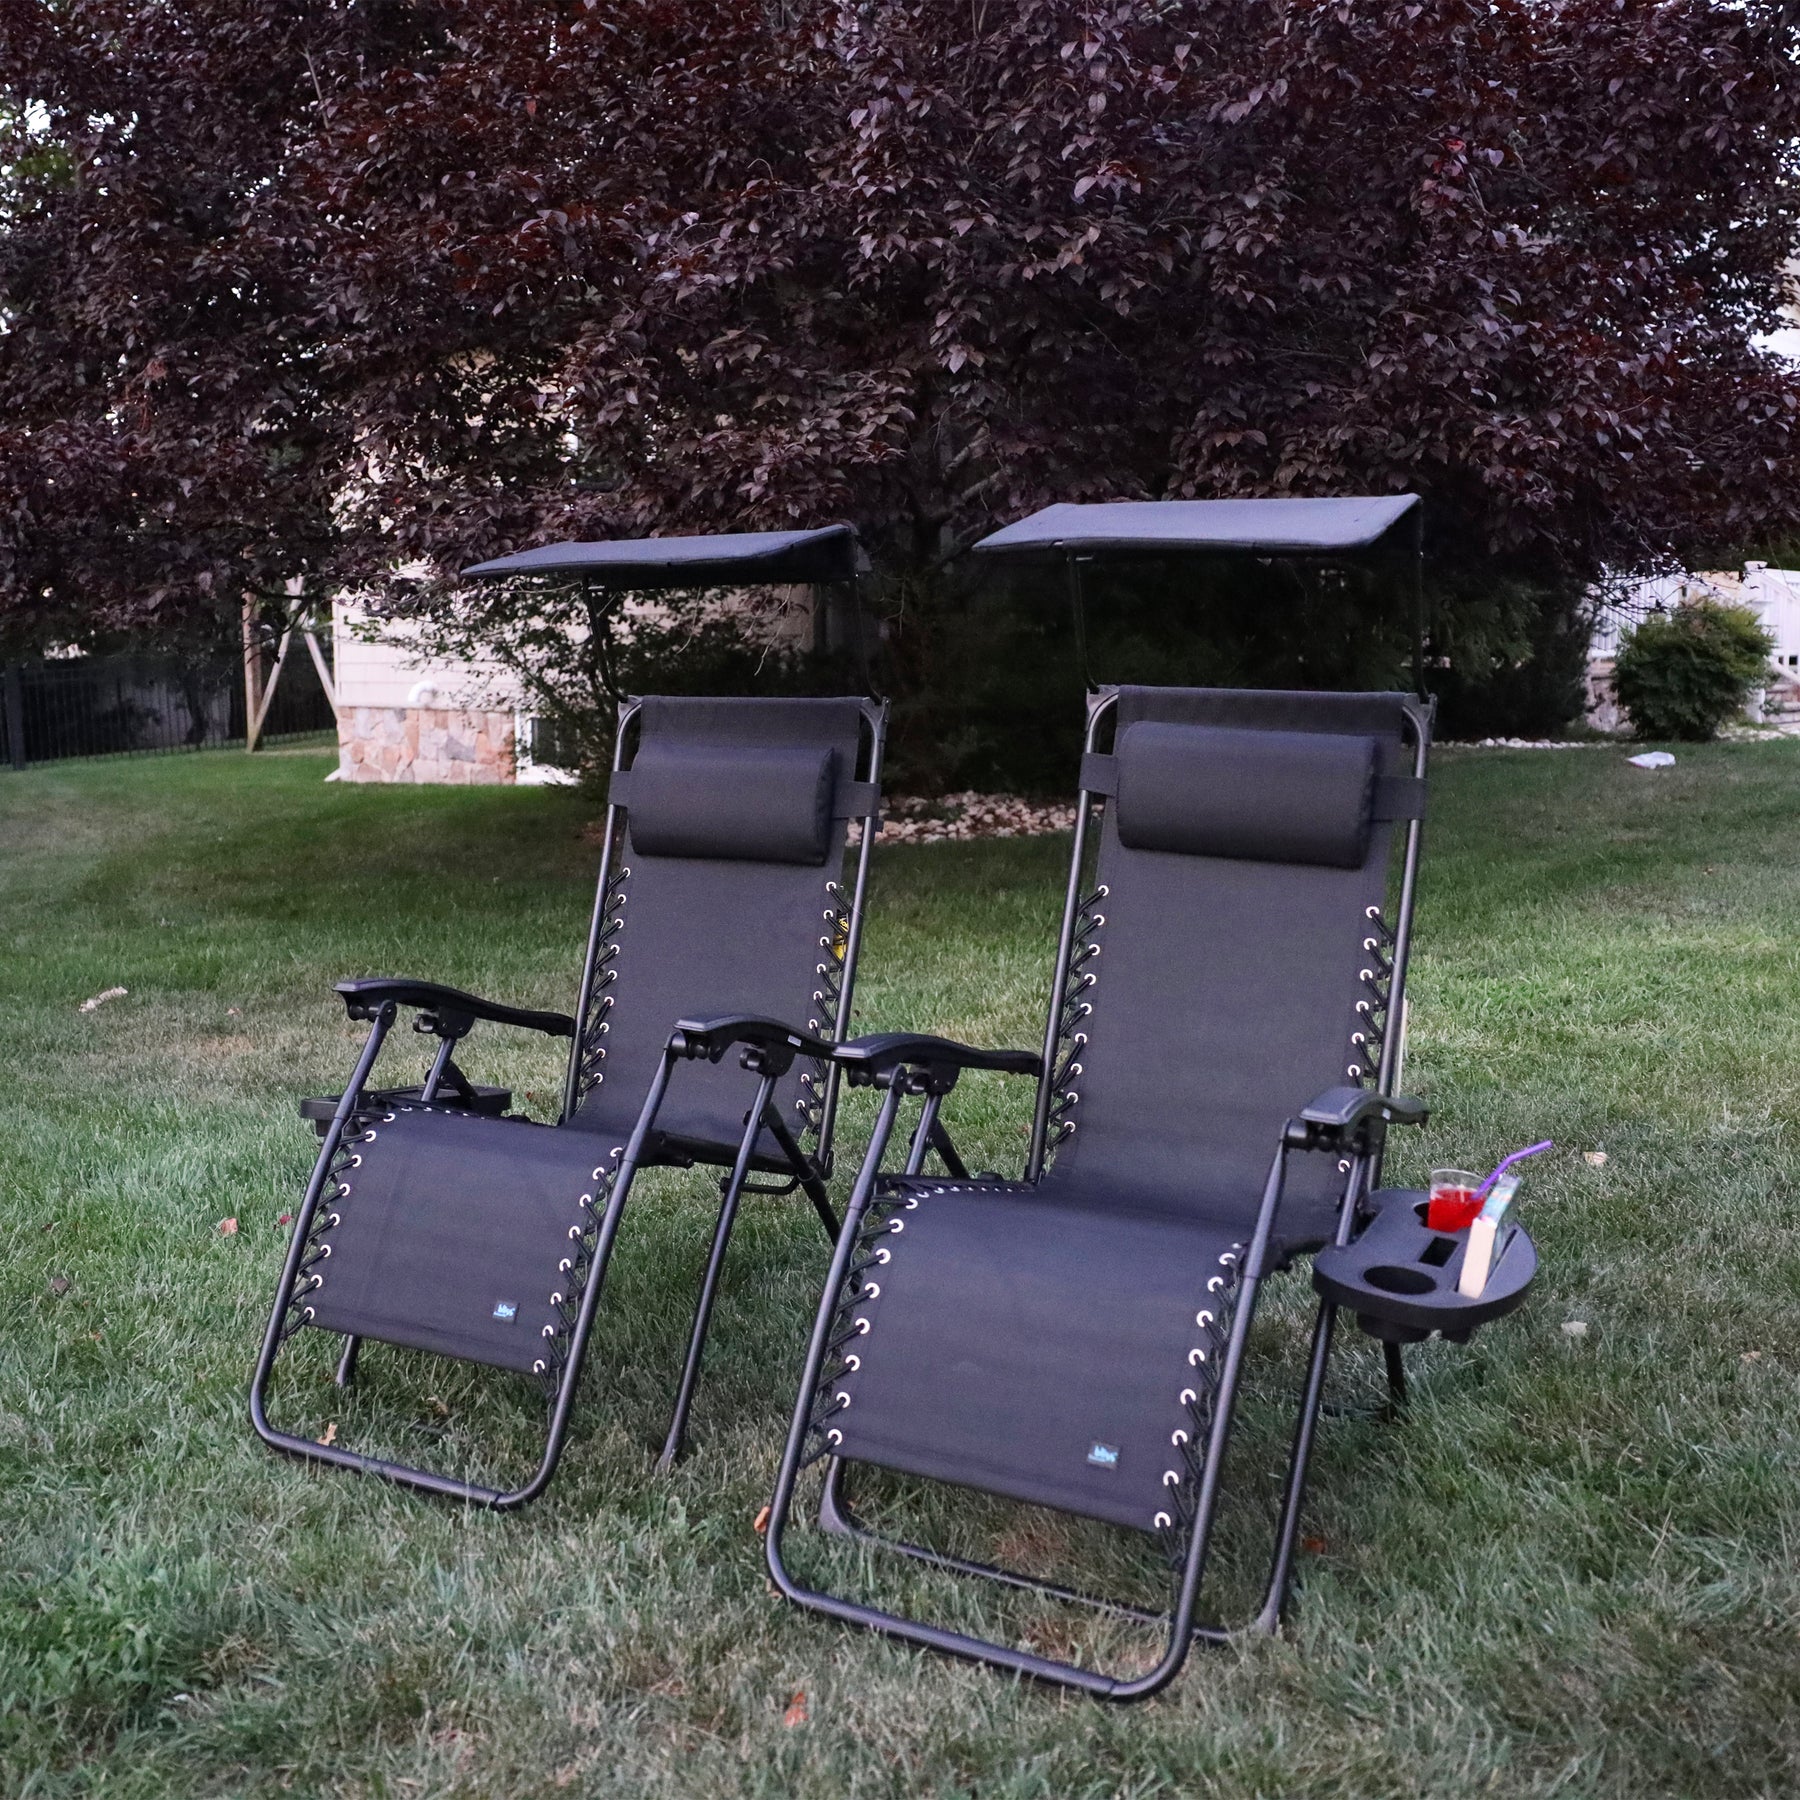 Set of 2 26-inch Black Zero Gravity Chairs on a lawn.